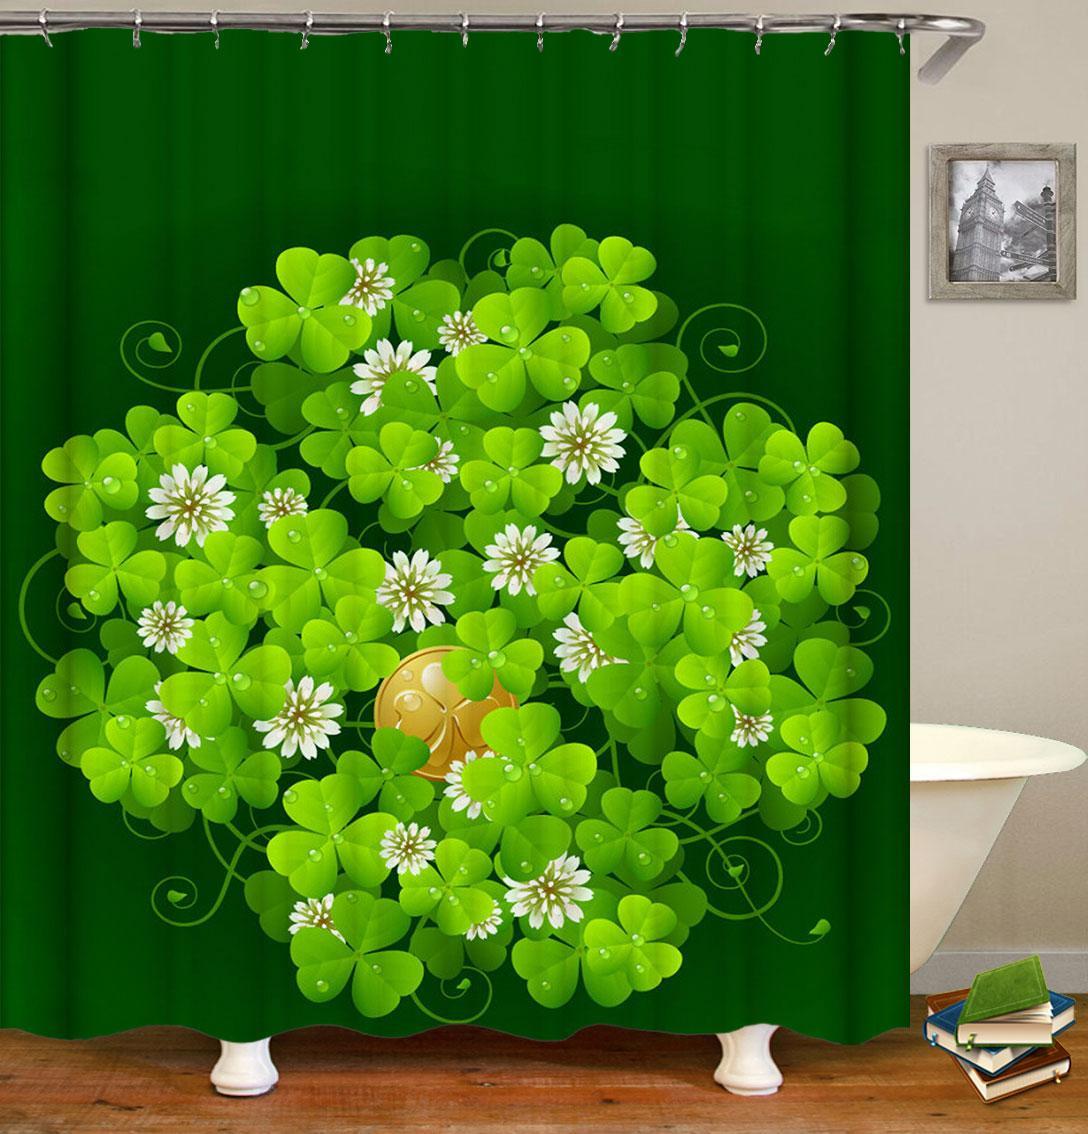 Green Clovers and Clover Flowers Shower Curtain 136cm x 180cm Shower Curtain Only